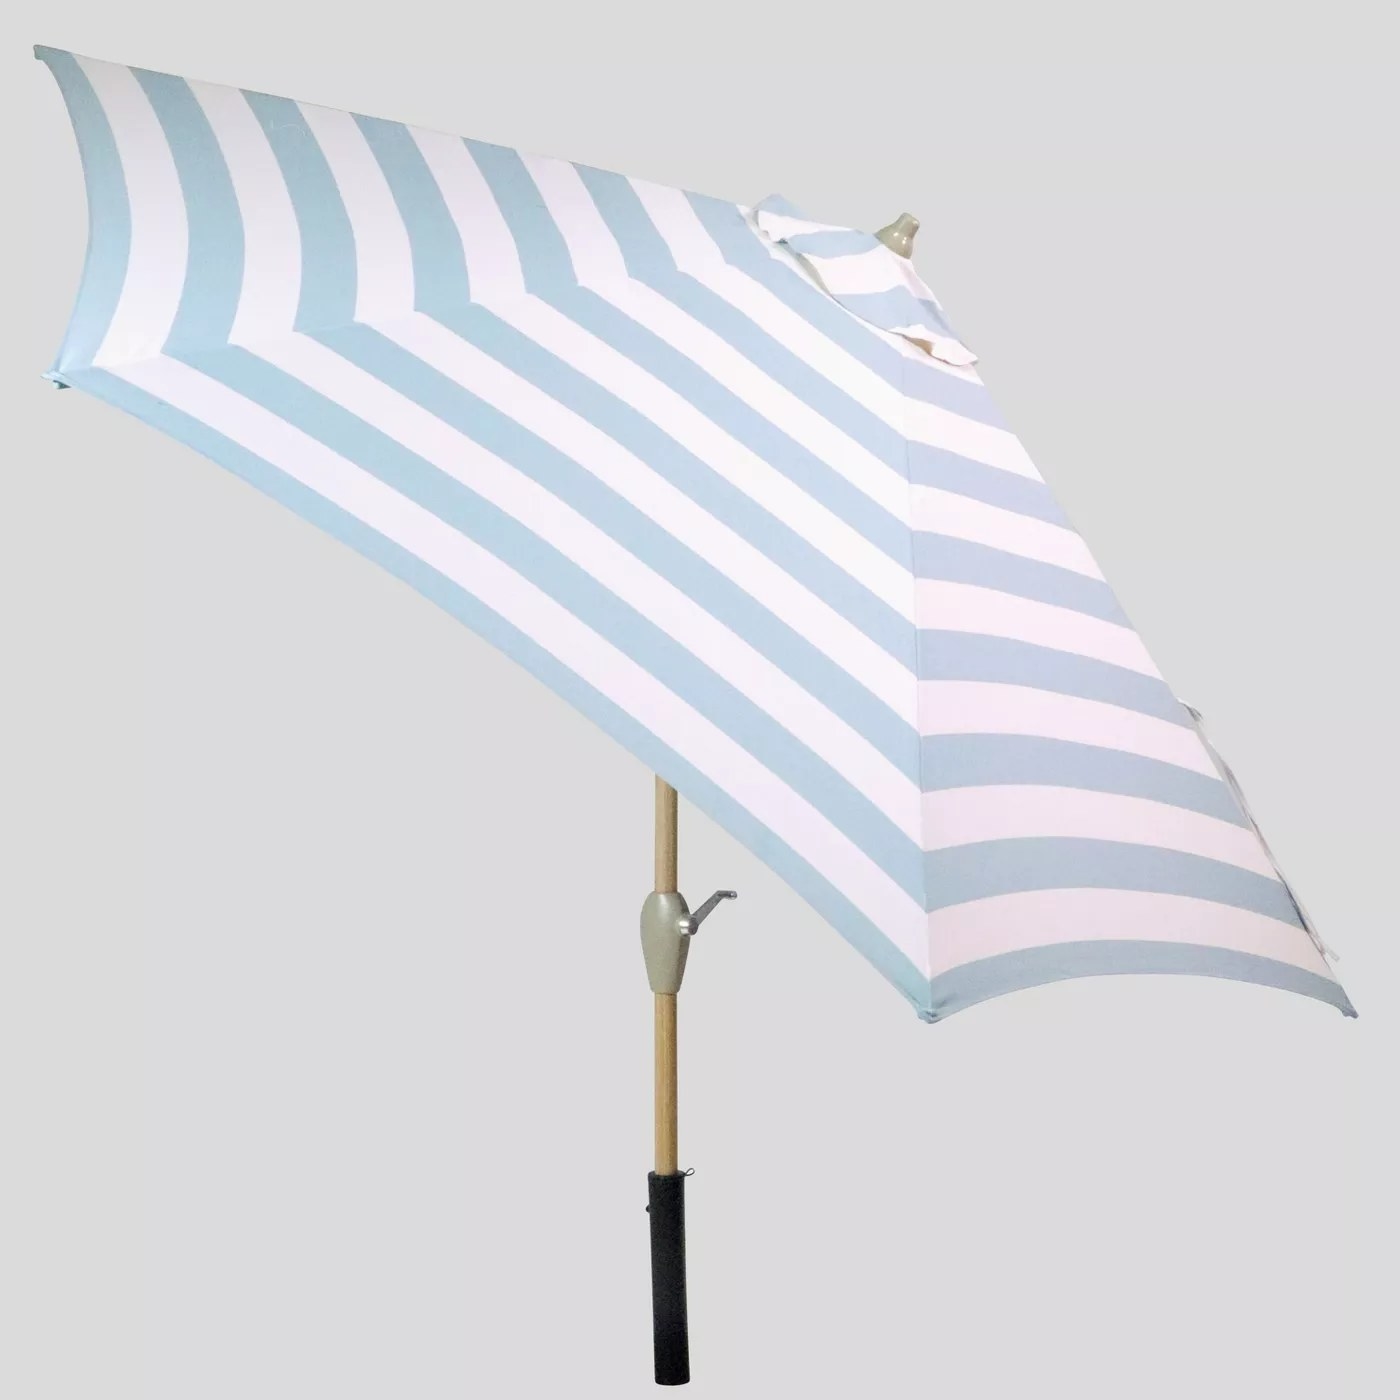 The striped umbrella with a lever to adjust the angle